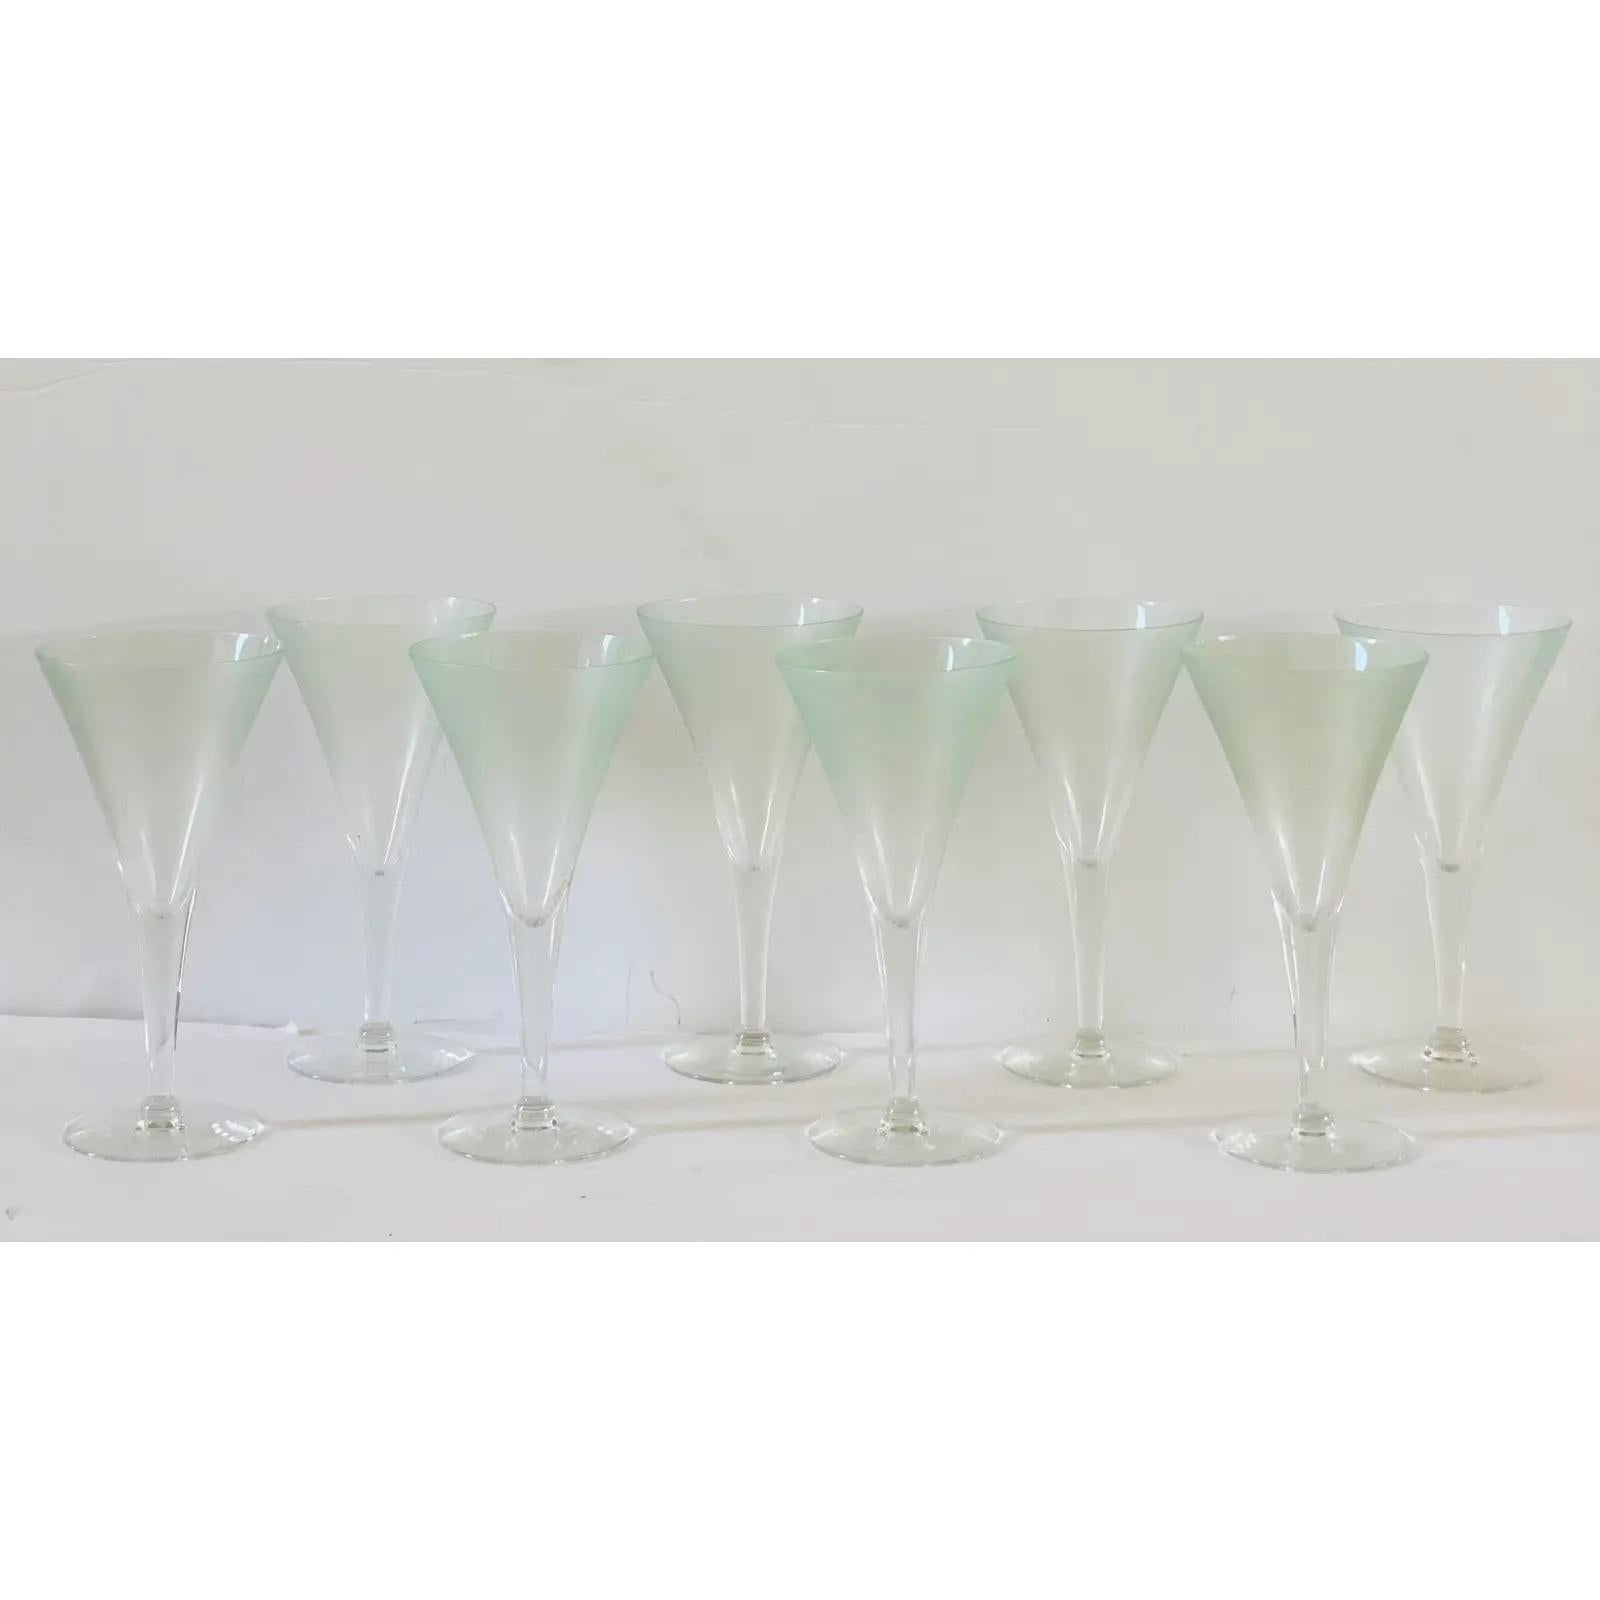 We are very pleased to offer an elegant set of champagne flutes or wine glasses by Dorothy Thorpe, circa the 1950s. The trumpet bowl showcases a very subtle frosted mint green that contrasts its smooth, clear tapered stem. Signed on the bottom. In